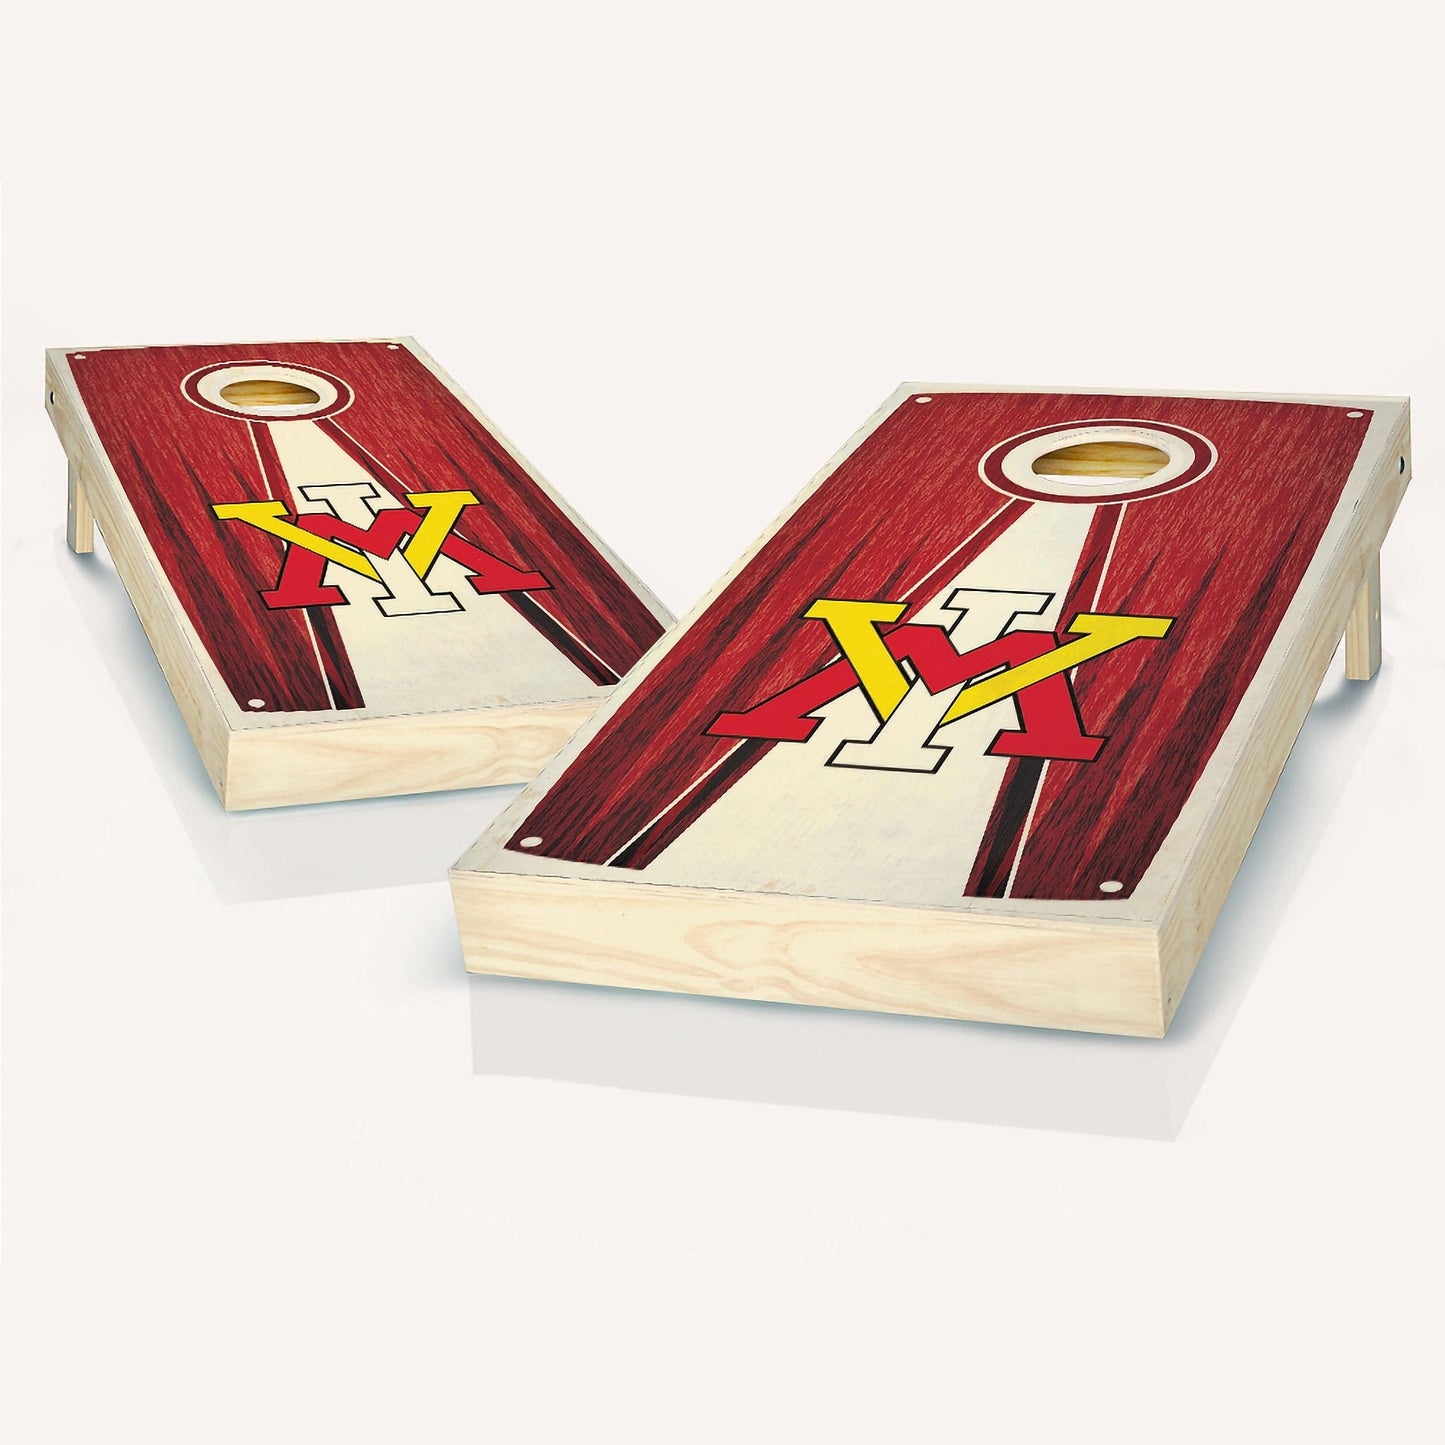 VMI Keydets Stained Pyramid Cornhole Boards